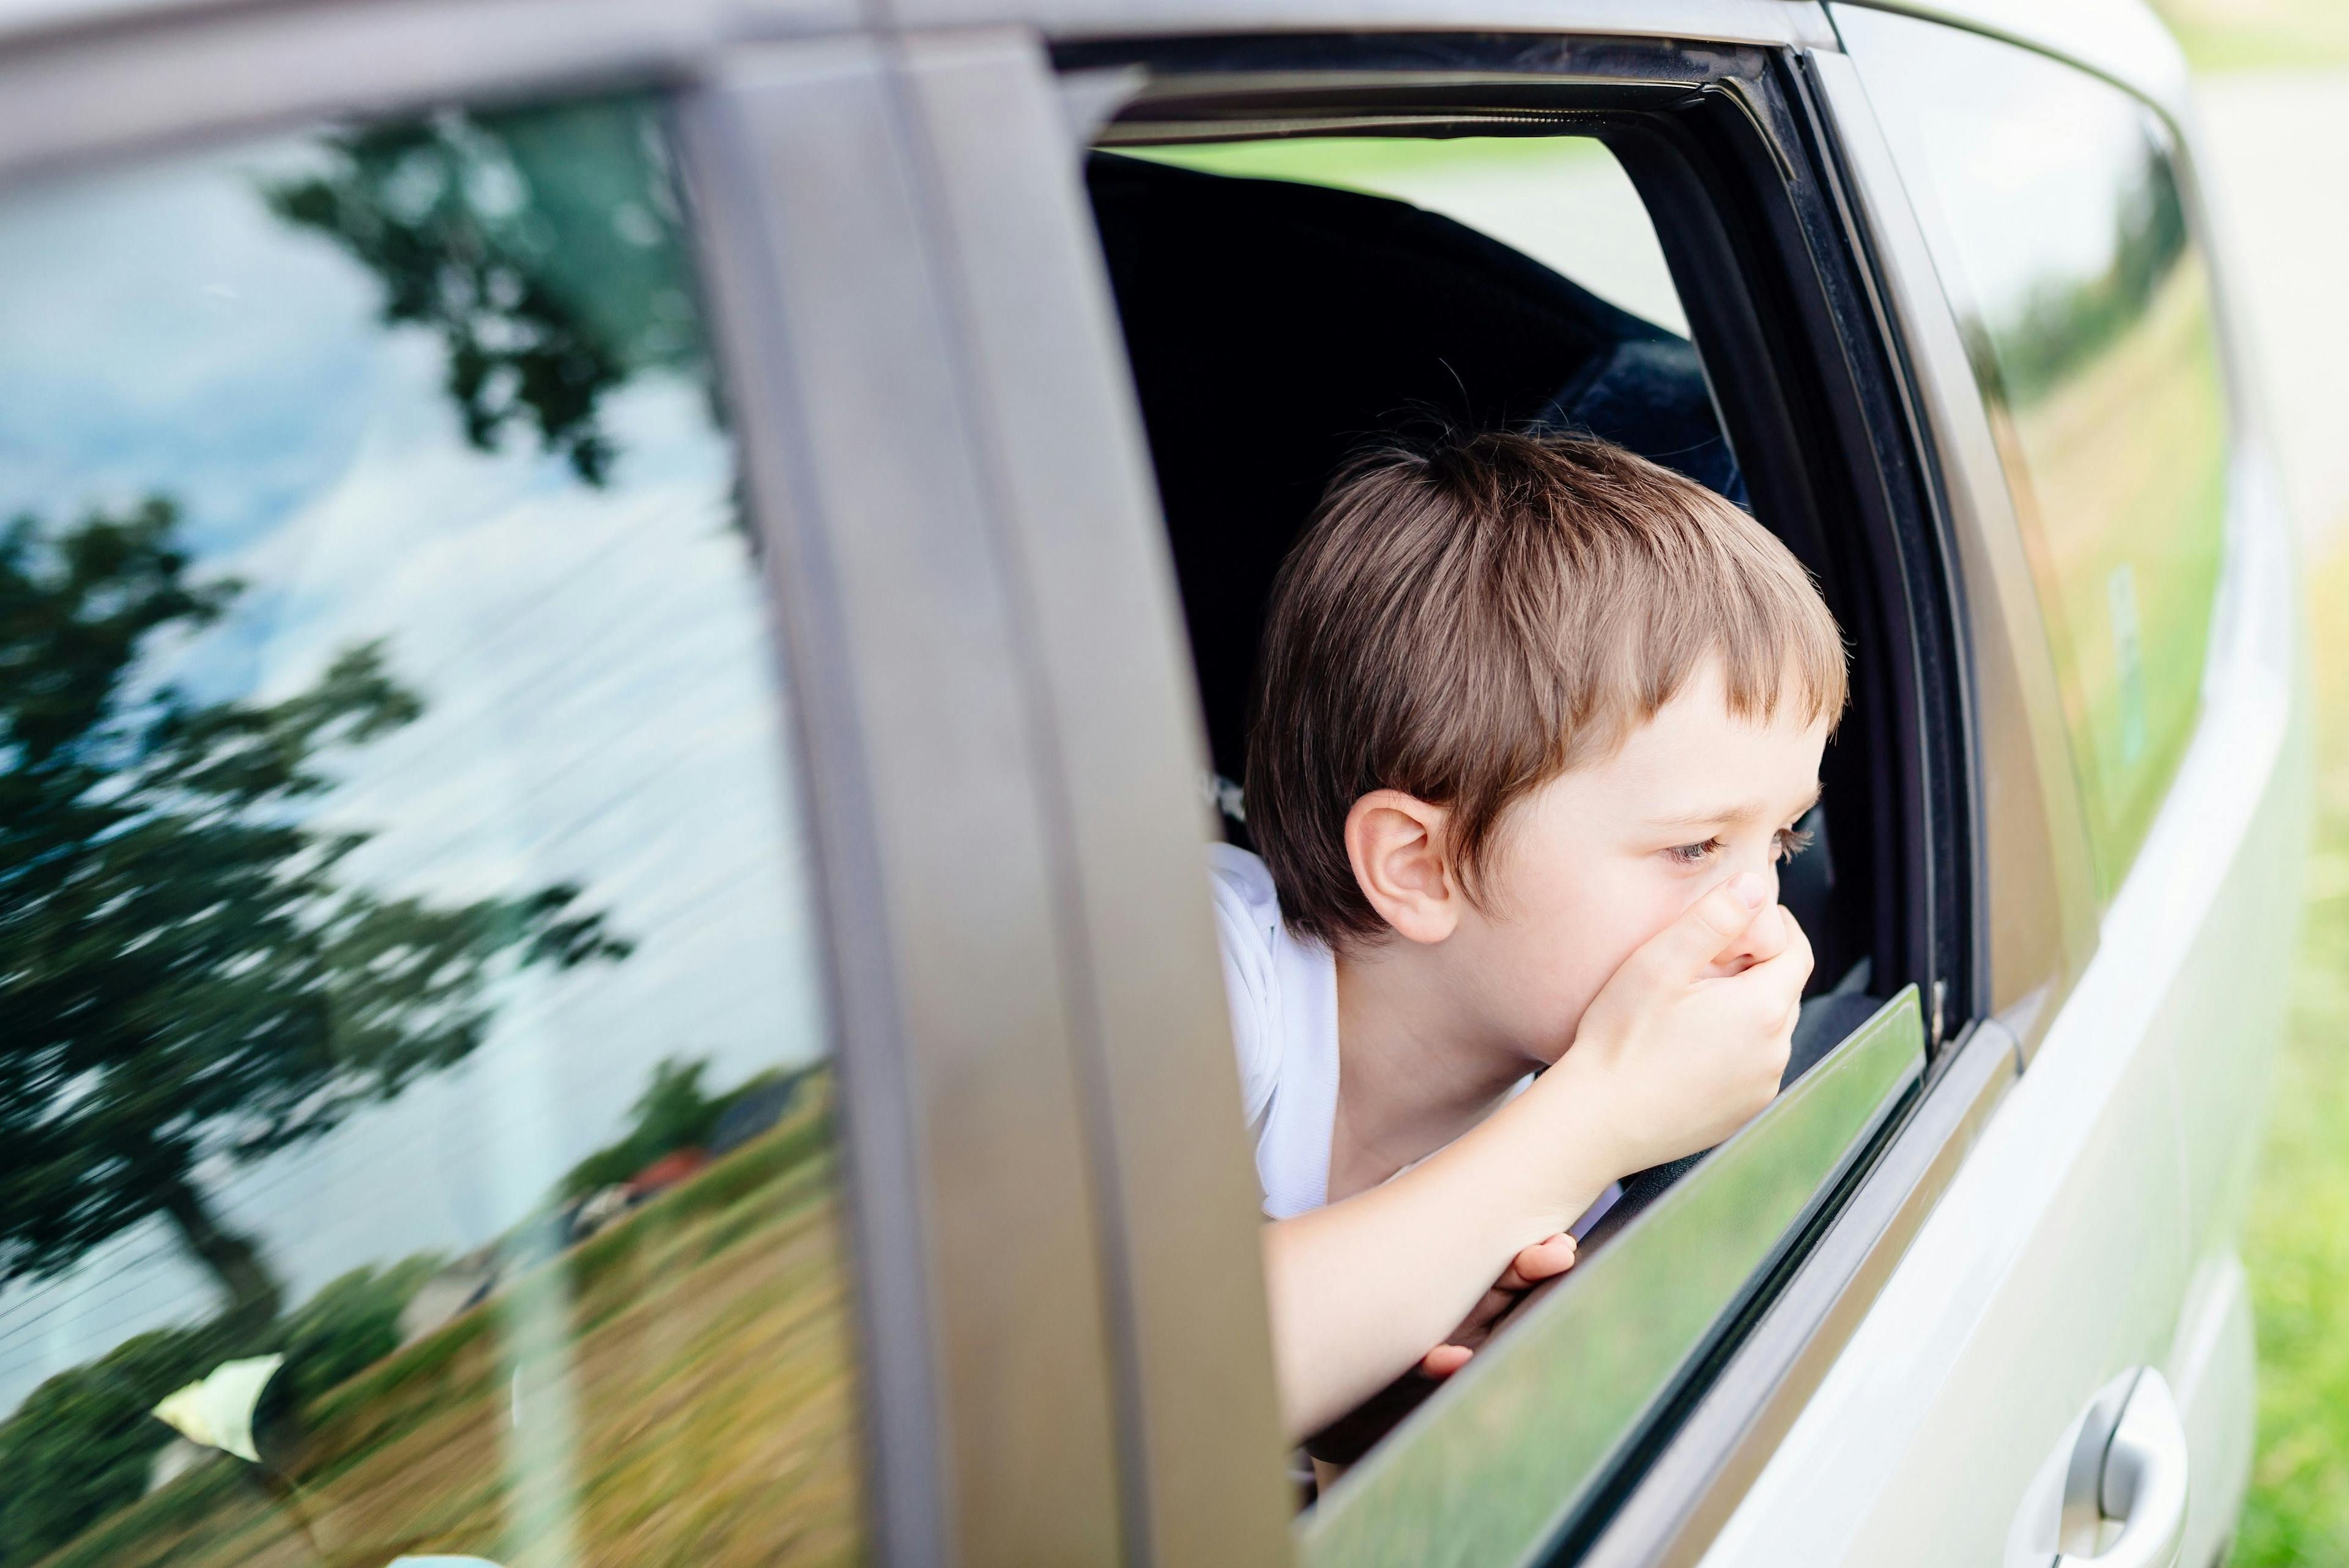 Child with motion sickness in the window of a car